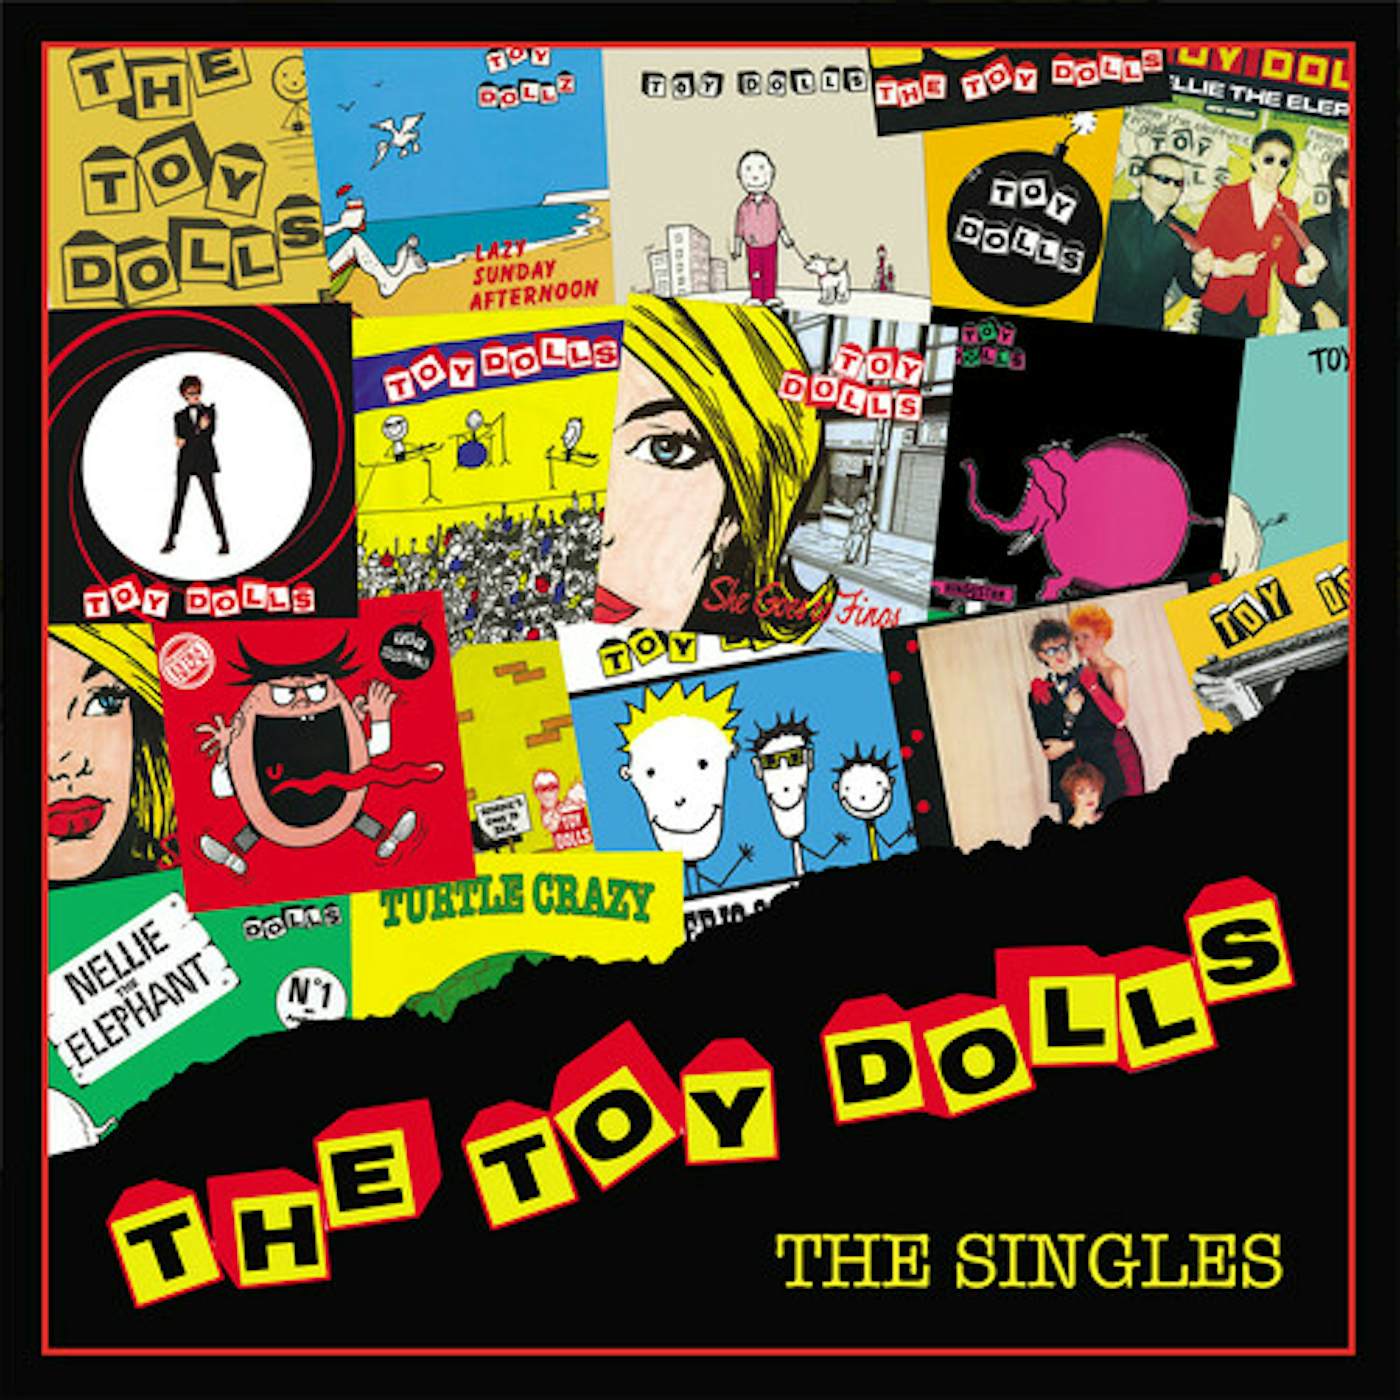 The Toy Dolls SINGLES CD